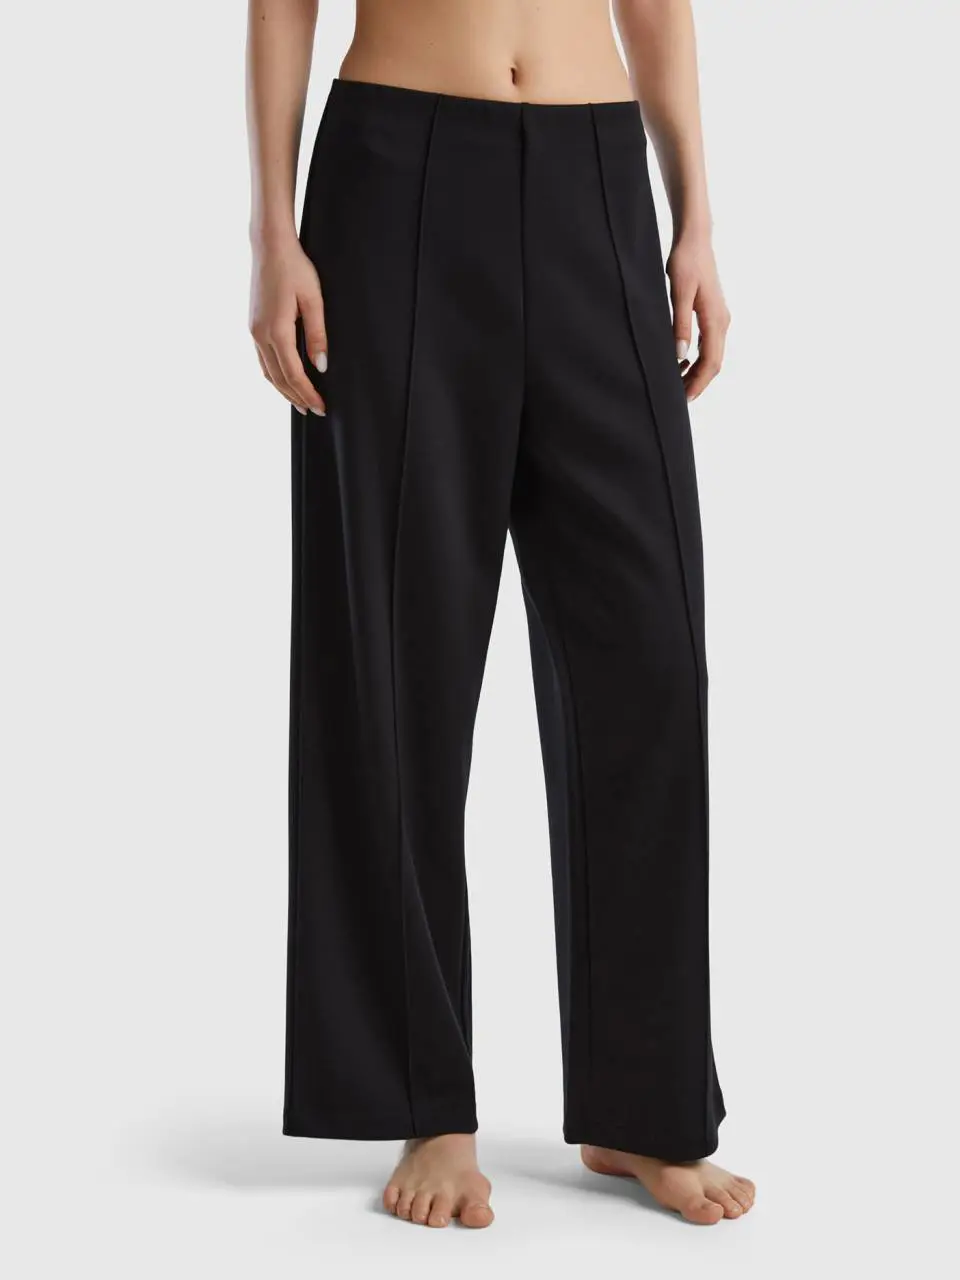 Benetton high-waisted palazzo trousers. 1